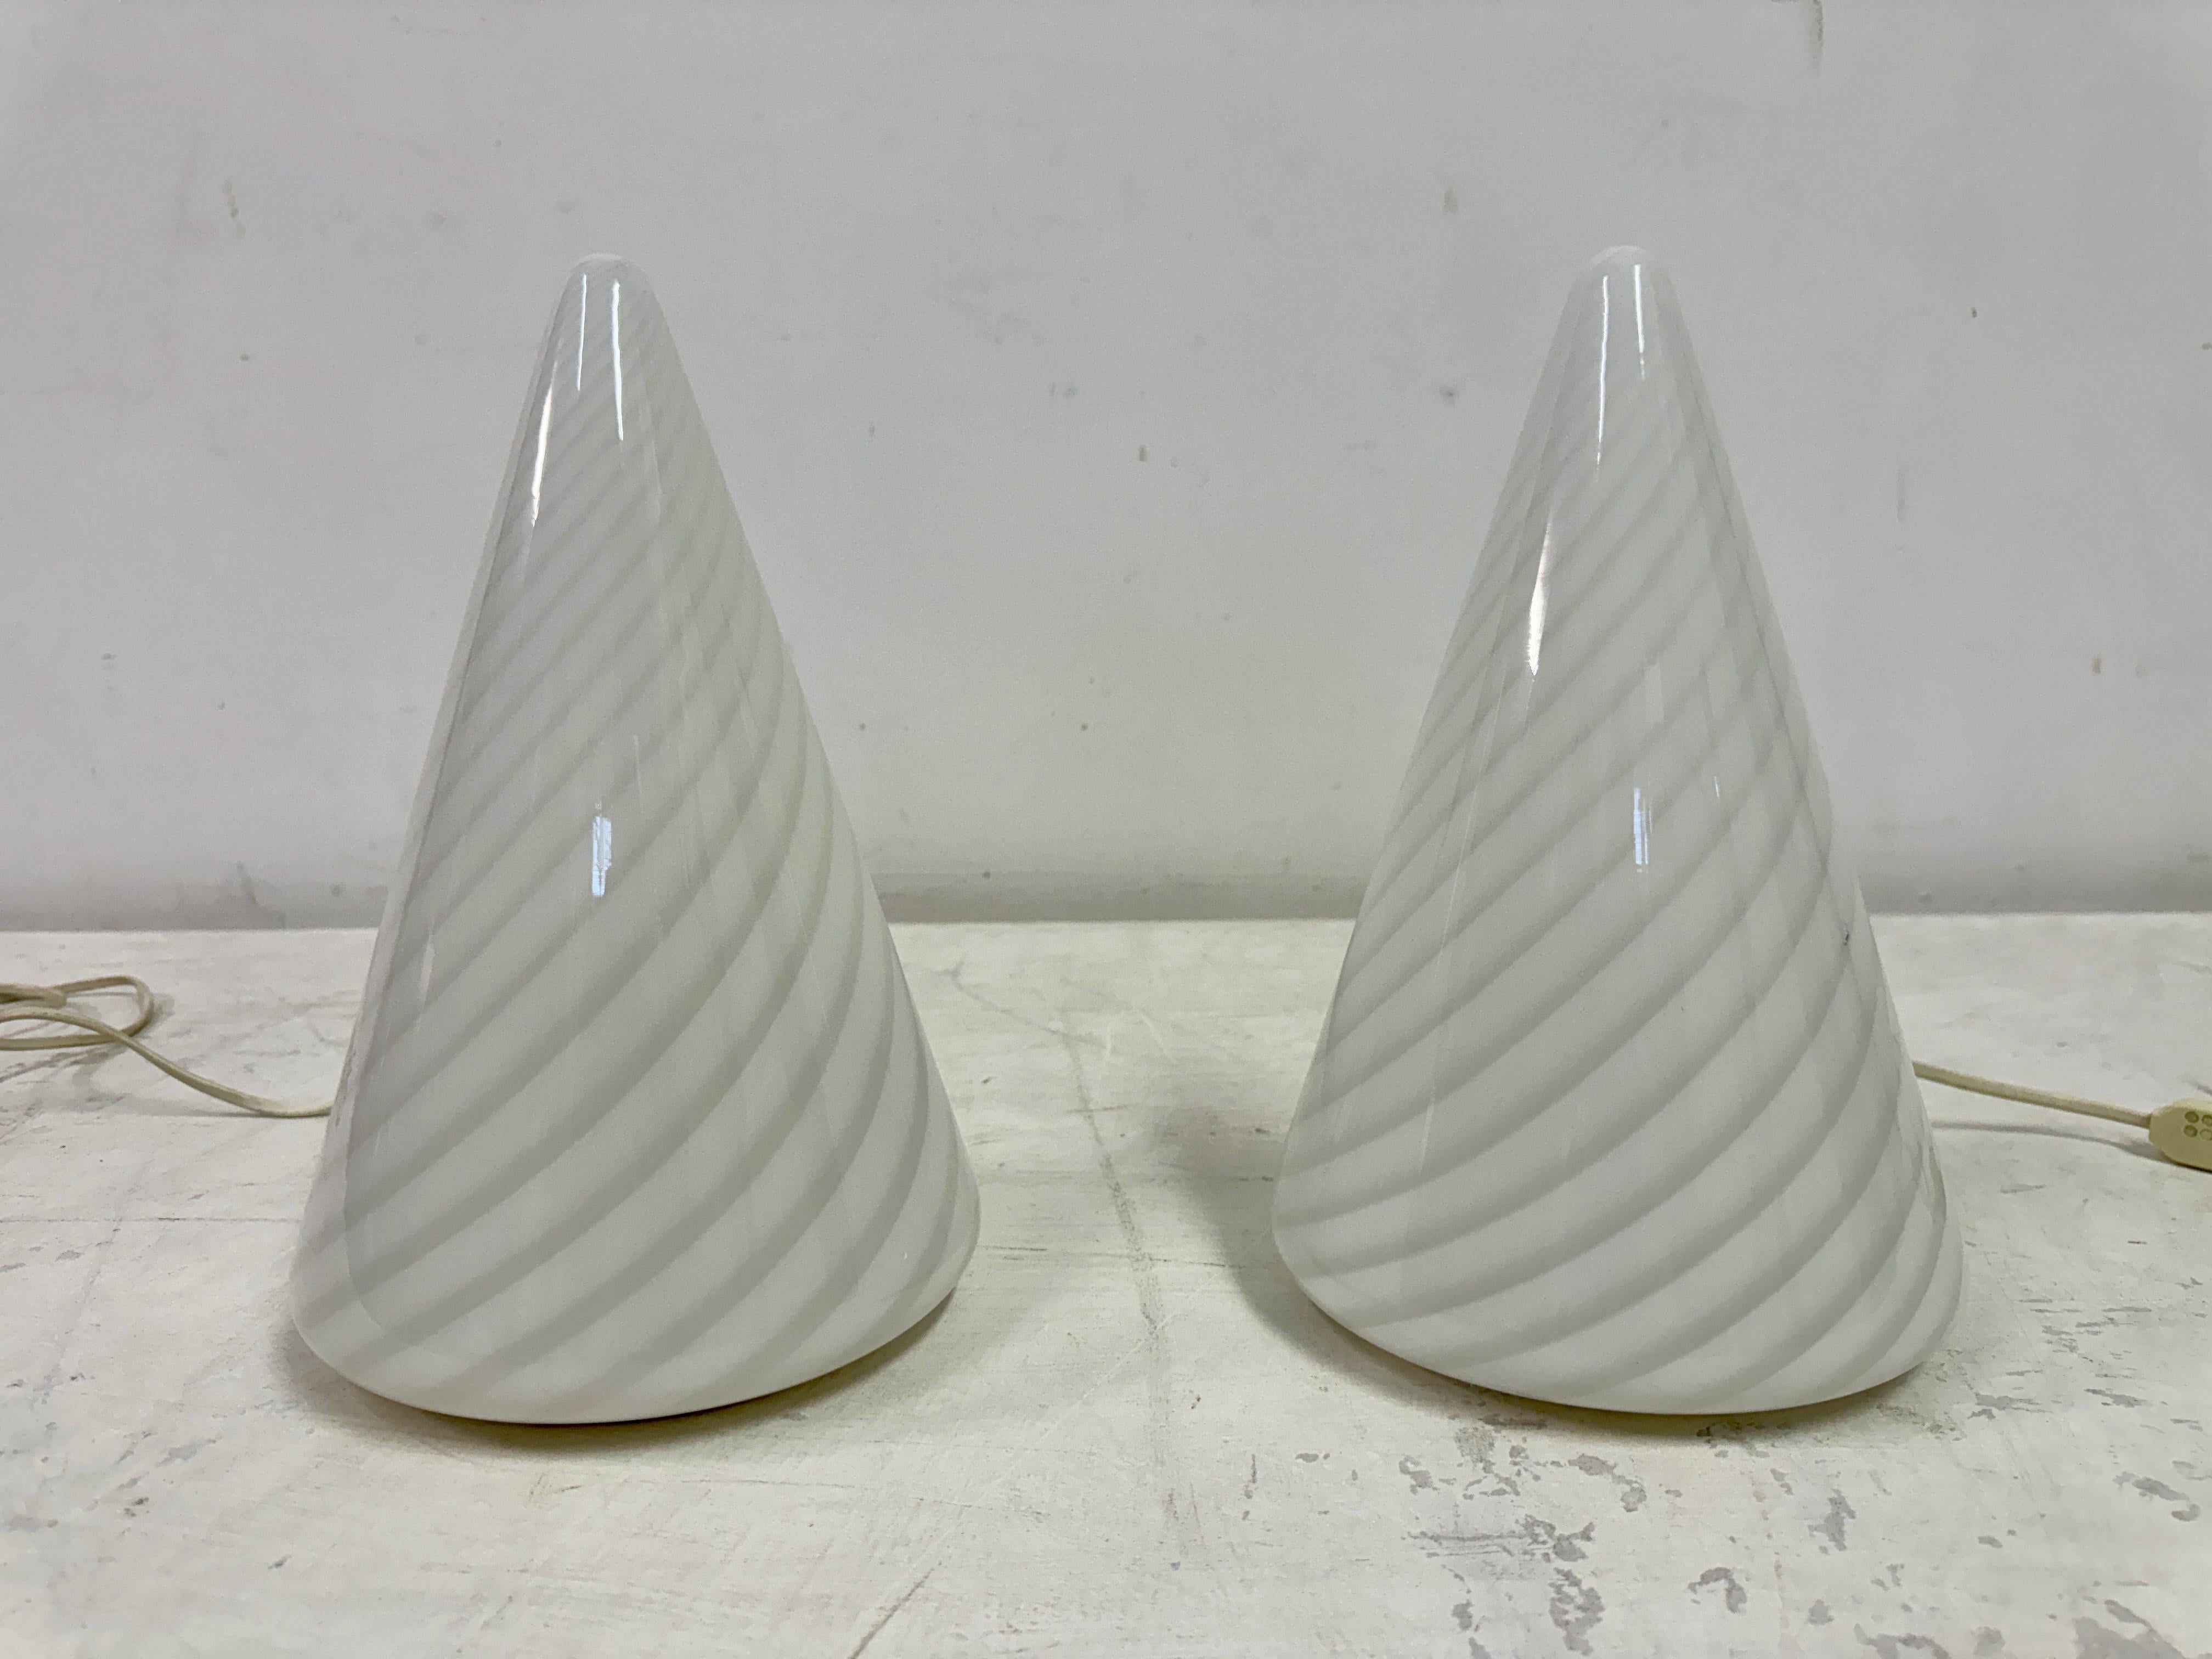 Pair of table lamps

Murano glass

Conical shaped

Italy 1970s